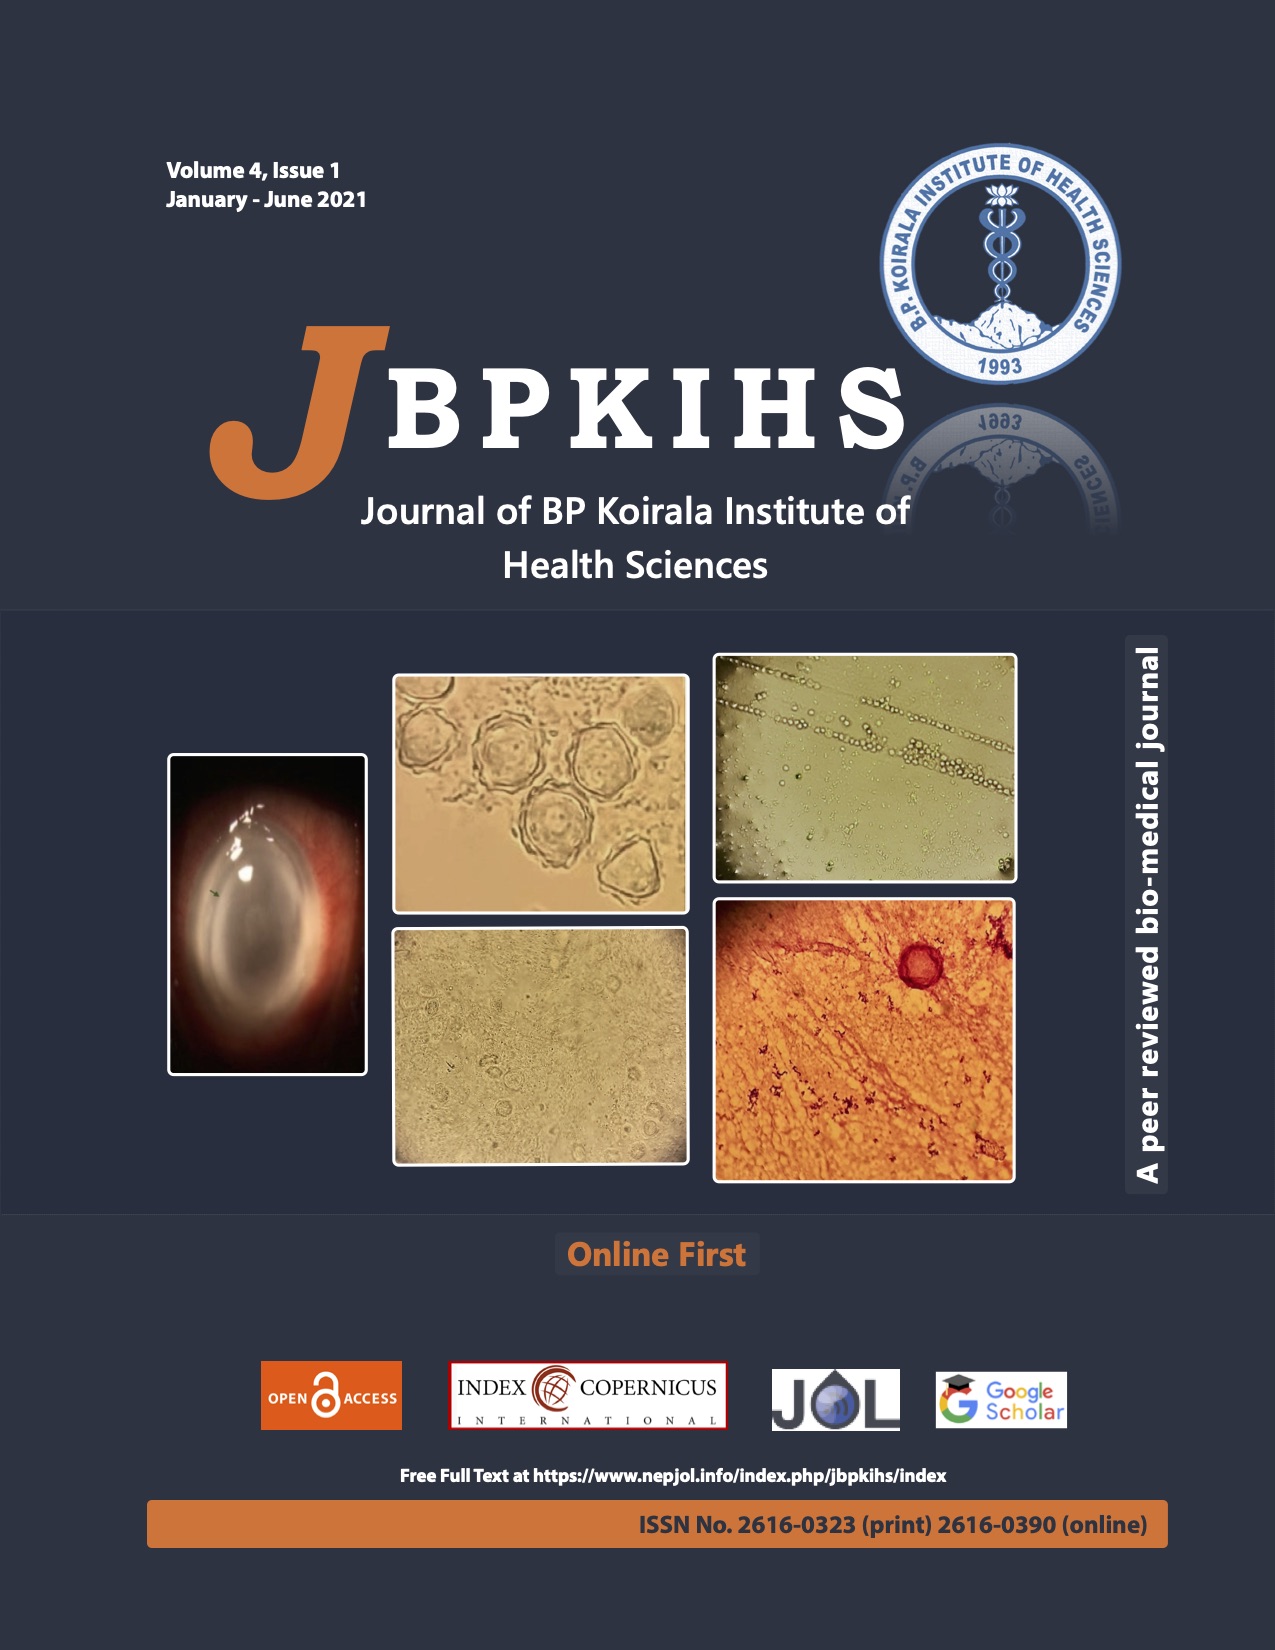 Cover JBPKIHS